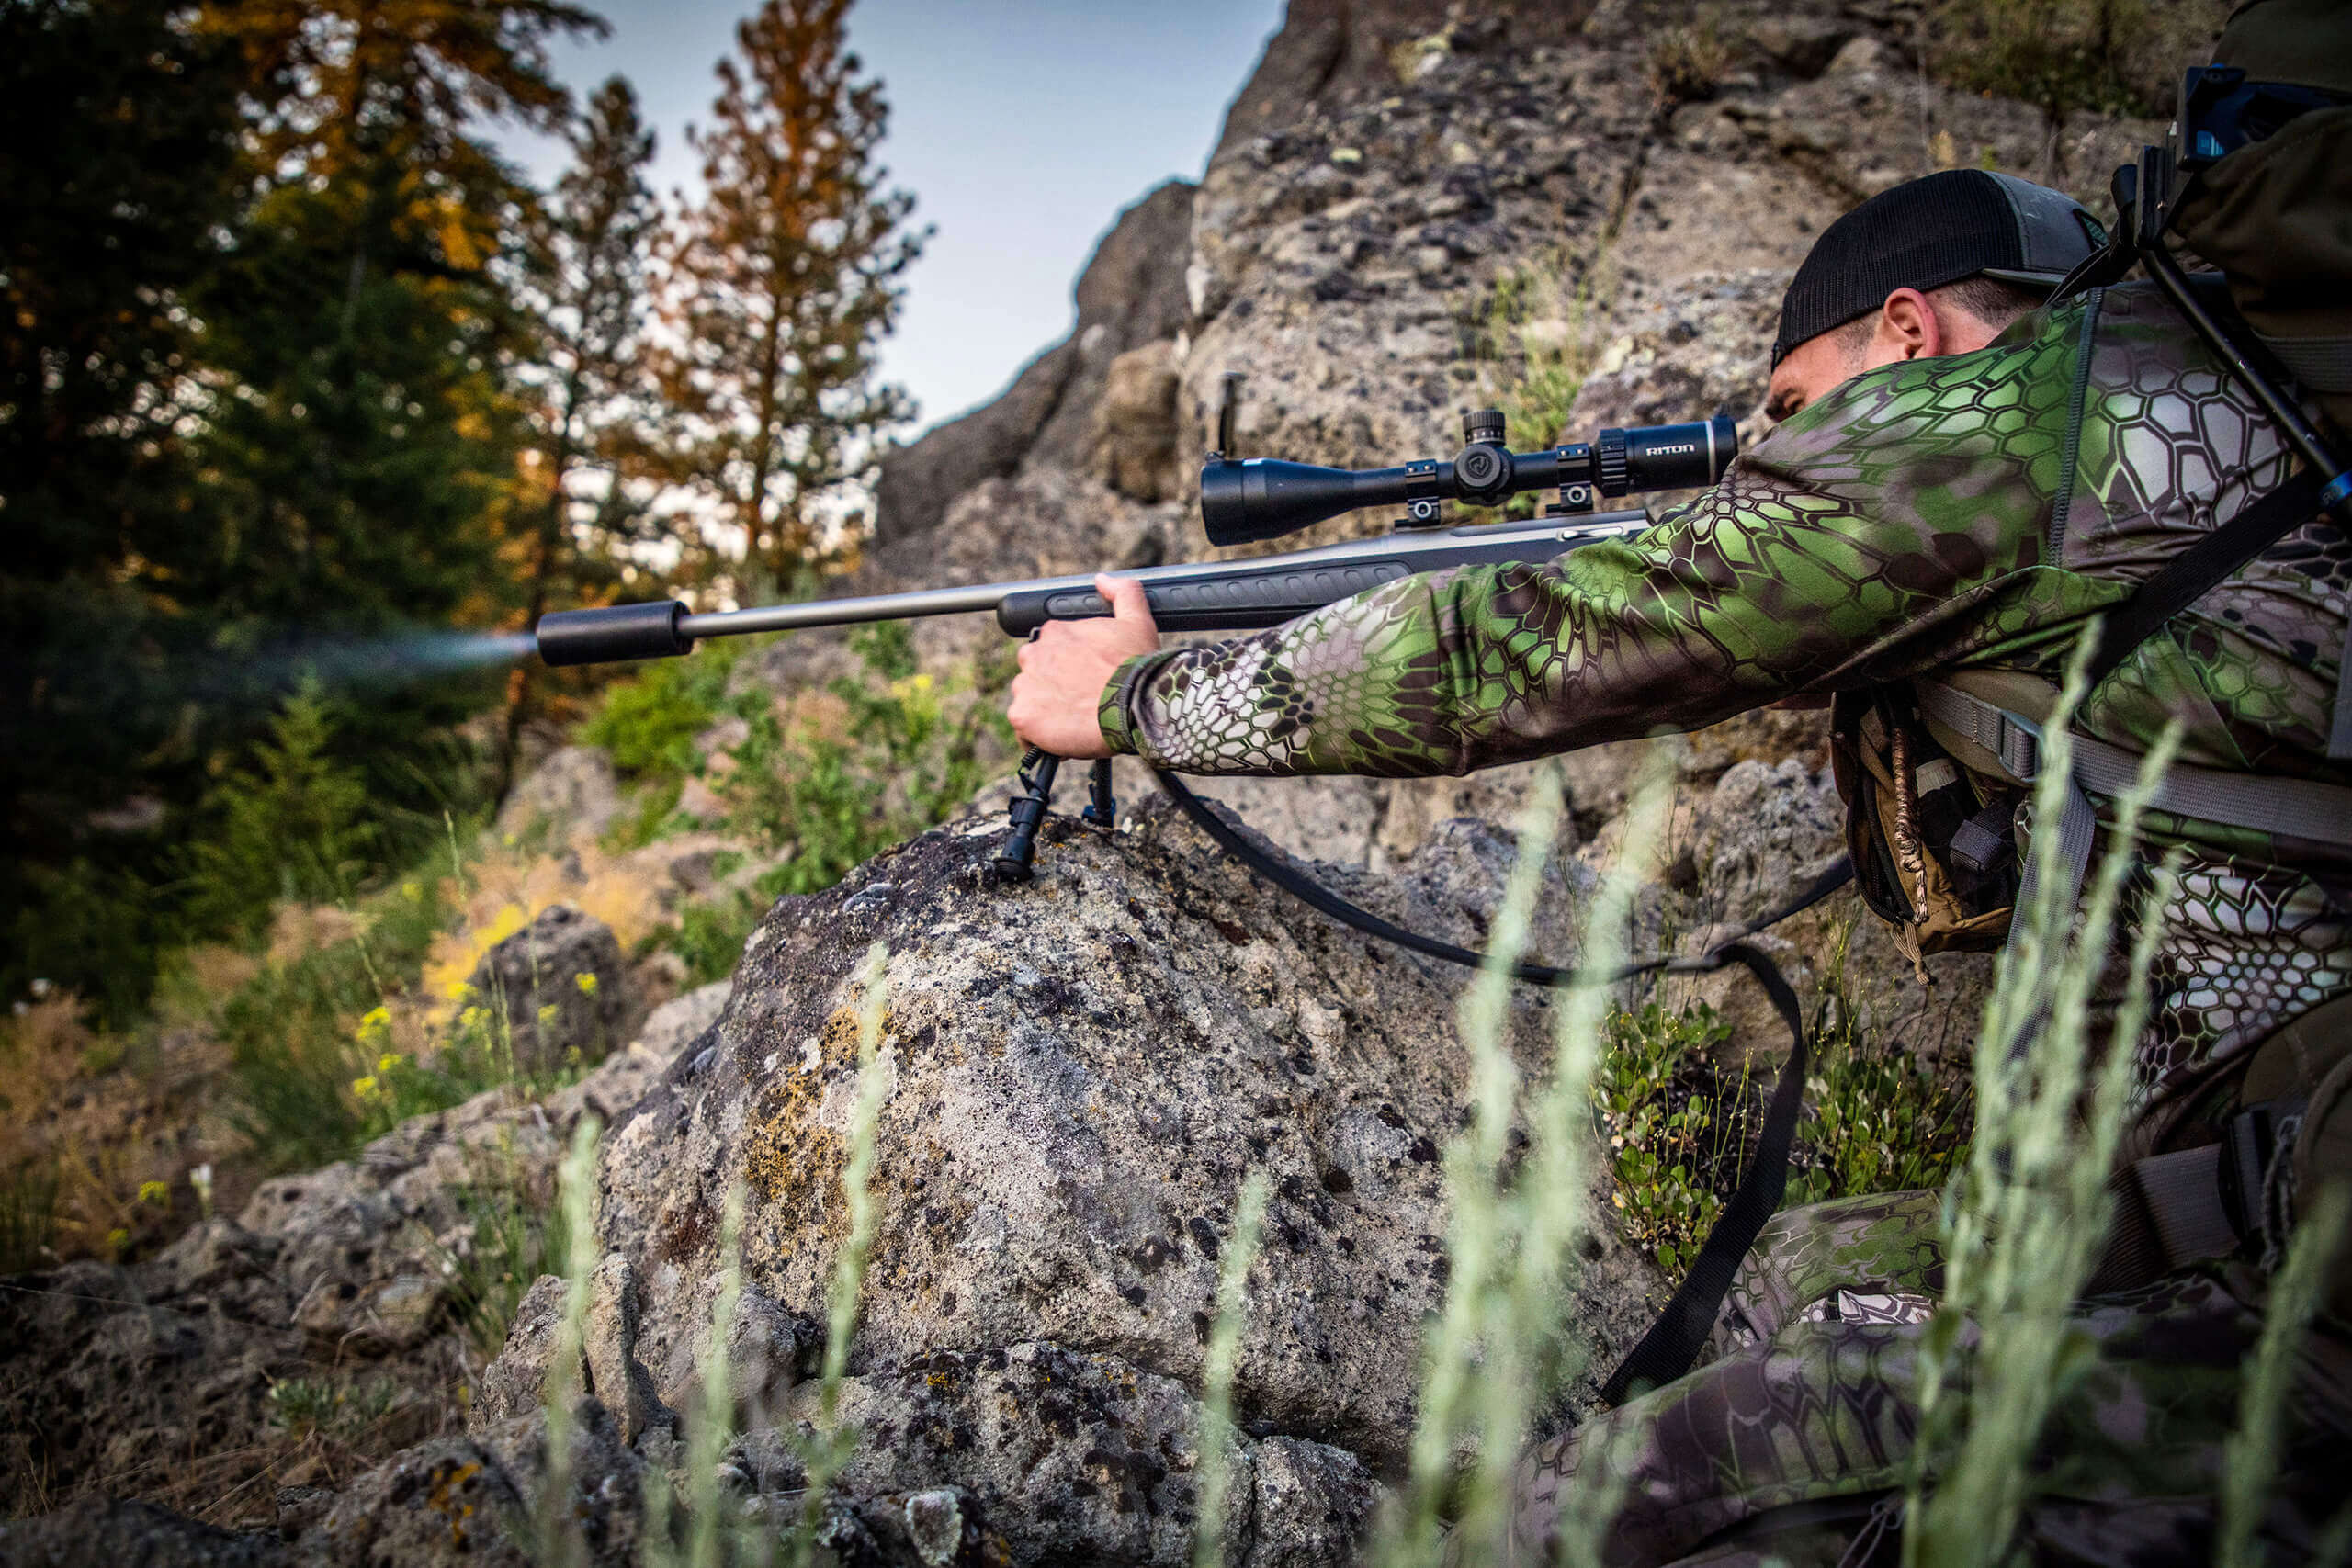 Can Ultra Compact Fighting Suppressors Be Used For Hunting?